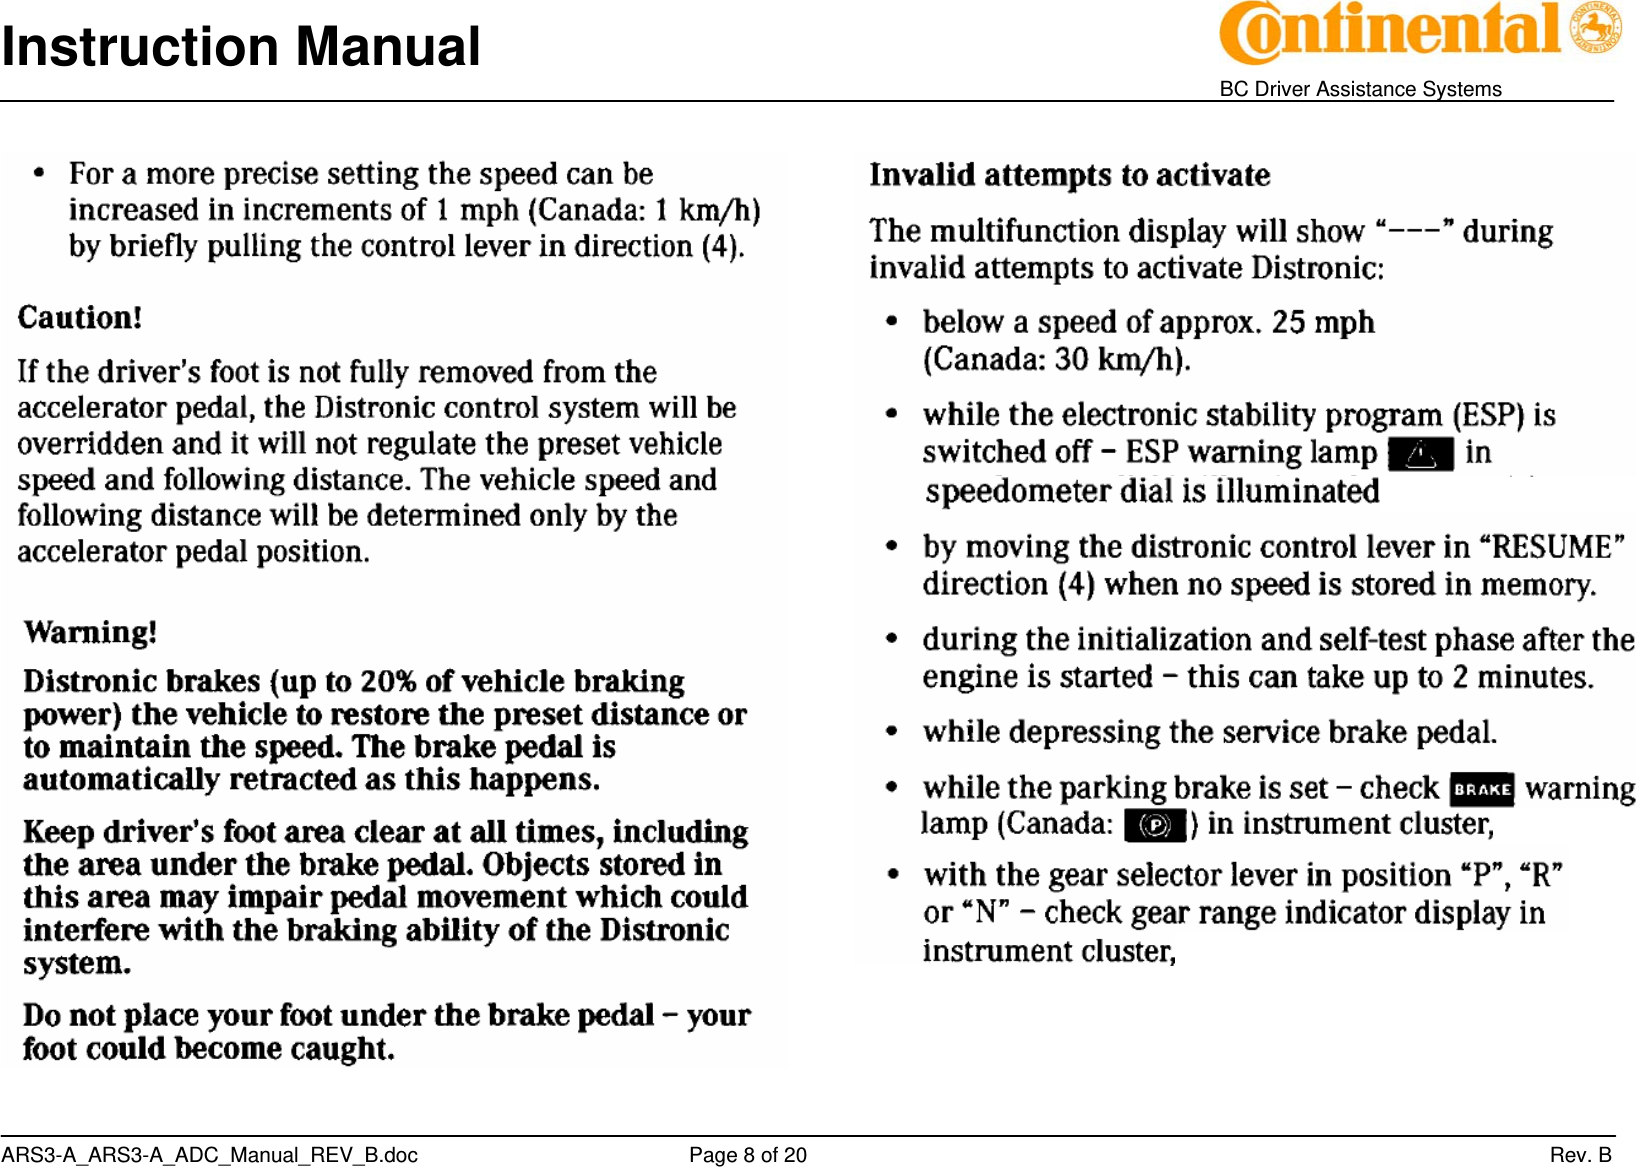 Instruction Manual    BC Driver Assistance Systems ARS3-A_ARS3-A_ADC_Manual_REV_B.doc     Page 8 of 20                 Rev. B        